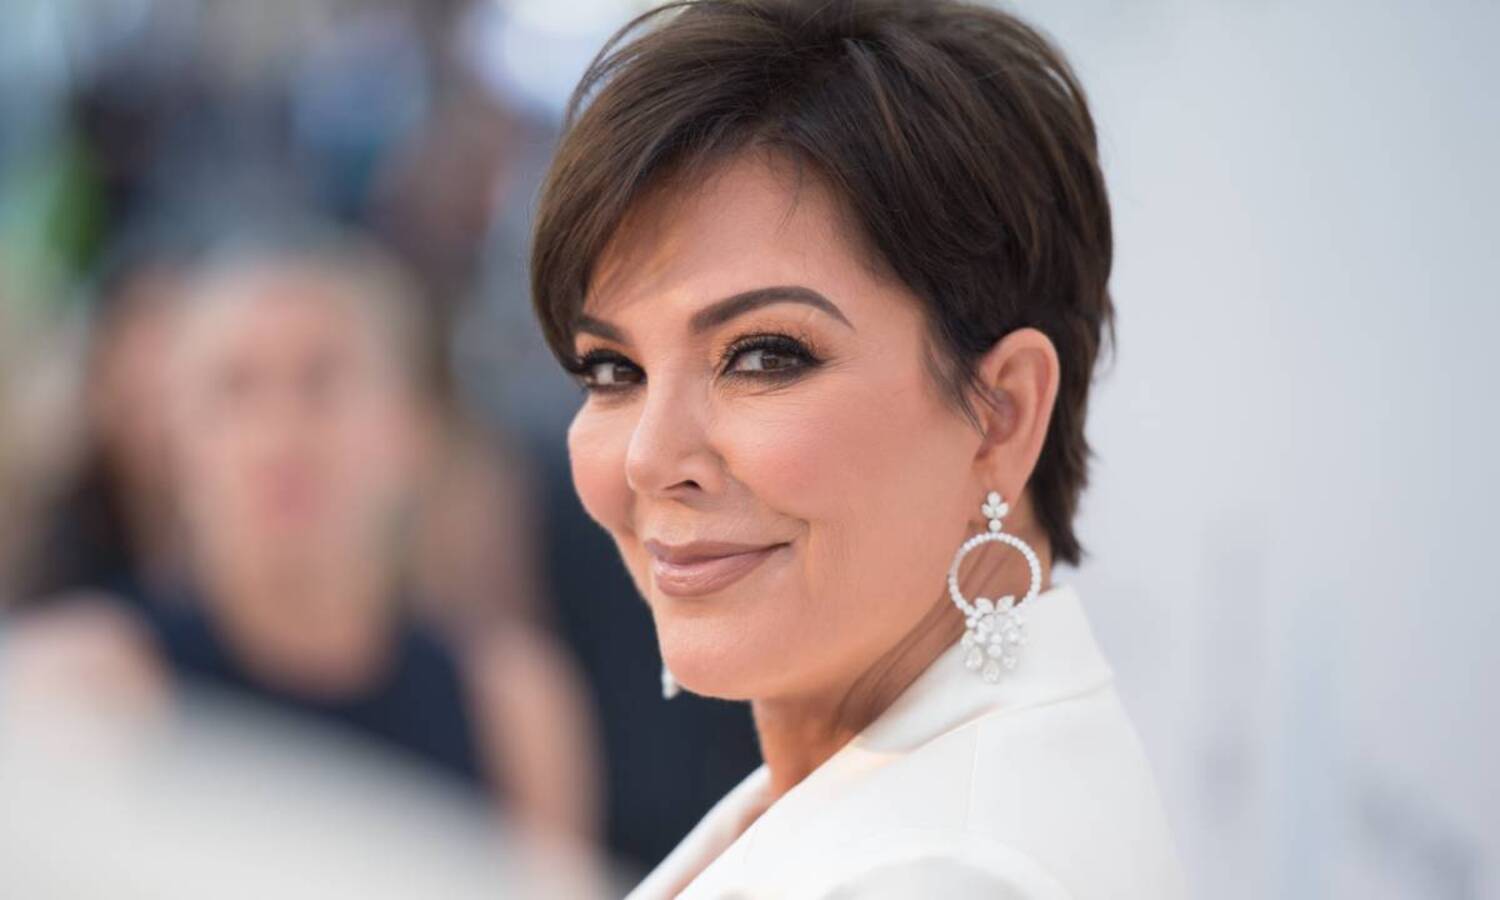 Kris Jenner is moving on from her children's empire. Now the momager is entering the beauty biz! Check out why Kris Jenner's net worth will only rise.